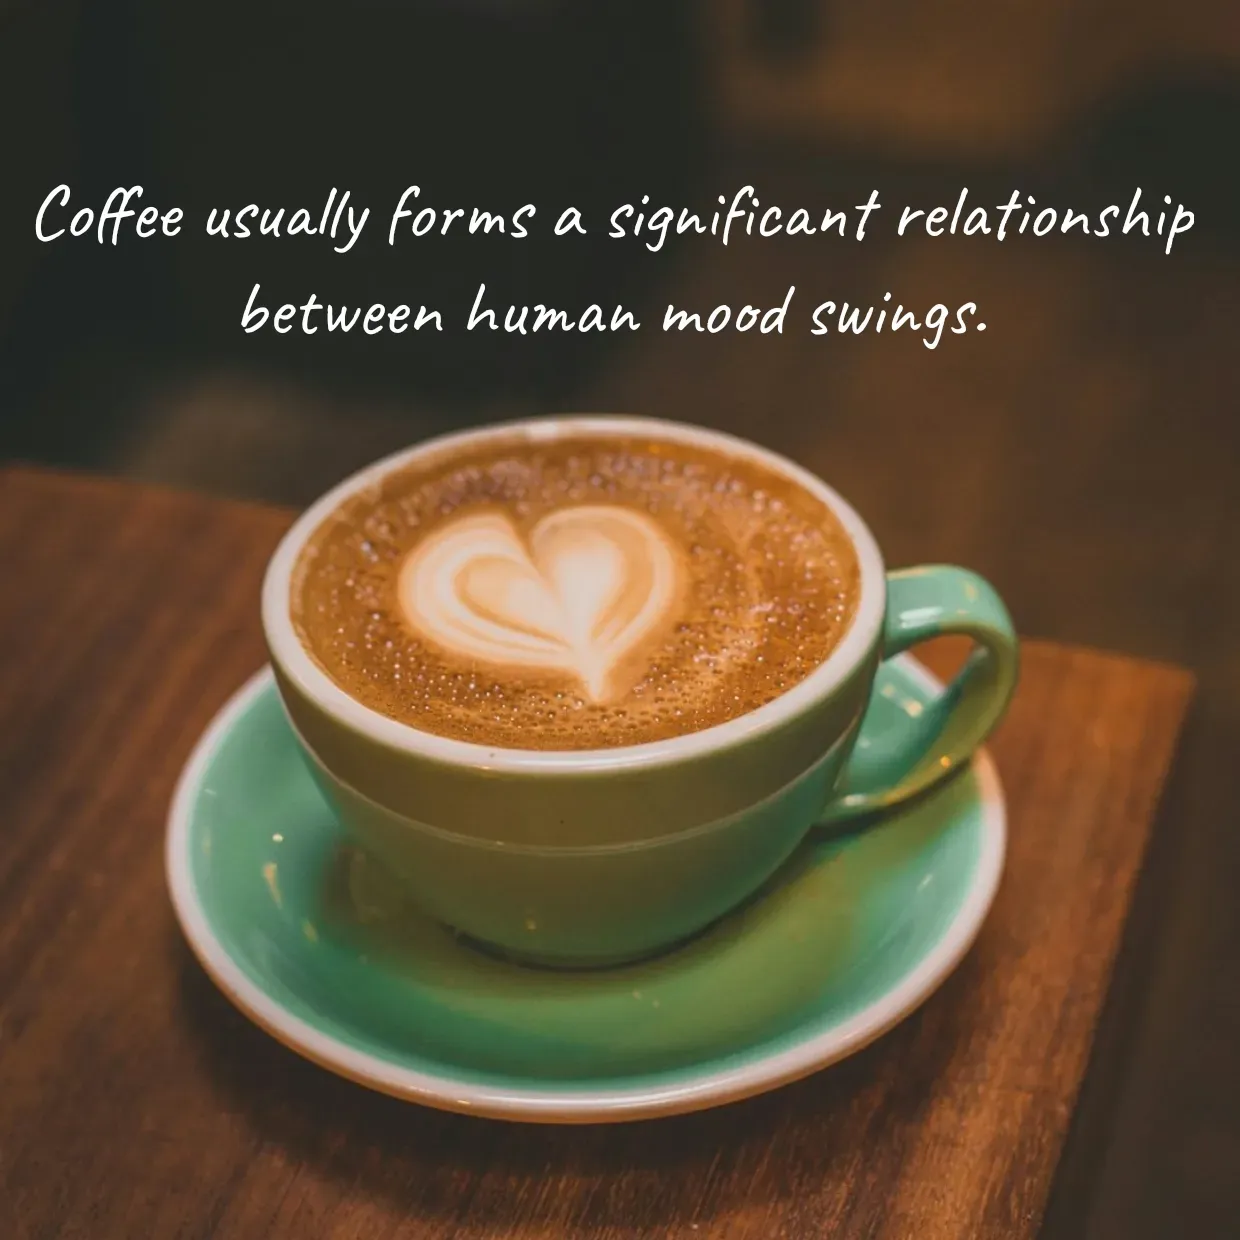 Quote by Peace finder - Coffee usually forms a significant relationship between human mood swings. - Made using Quotes Creator App, Post Maker App